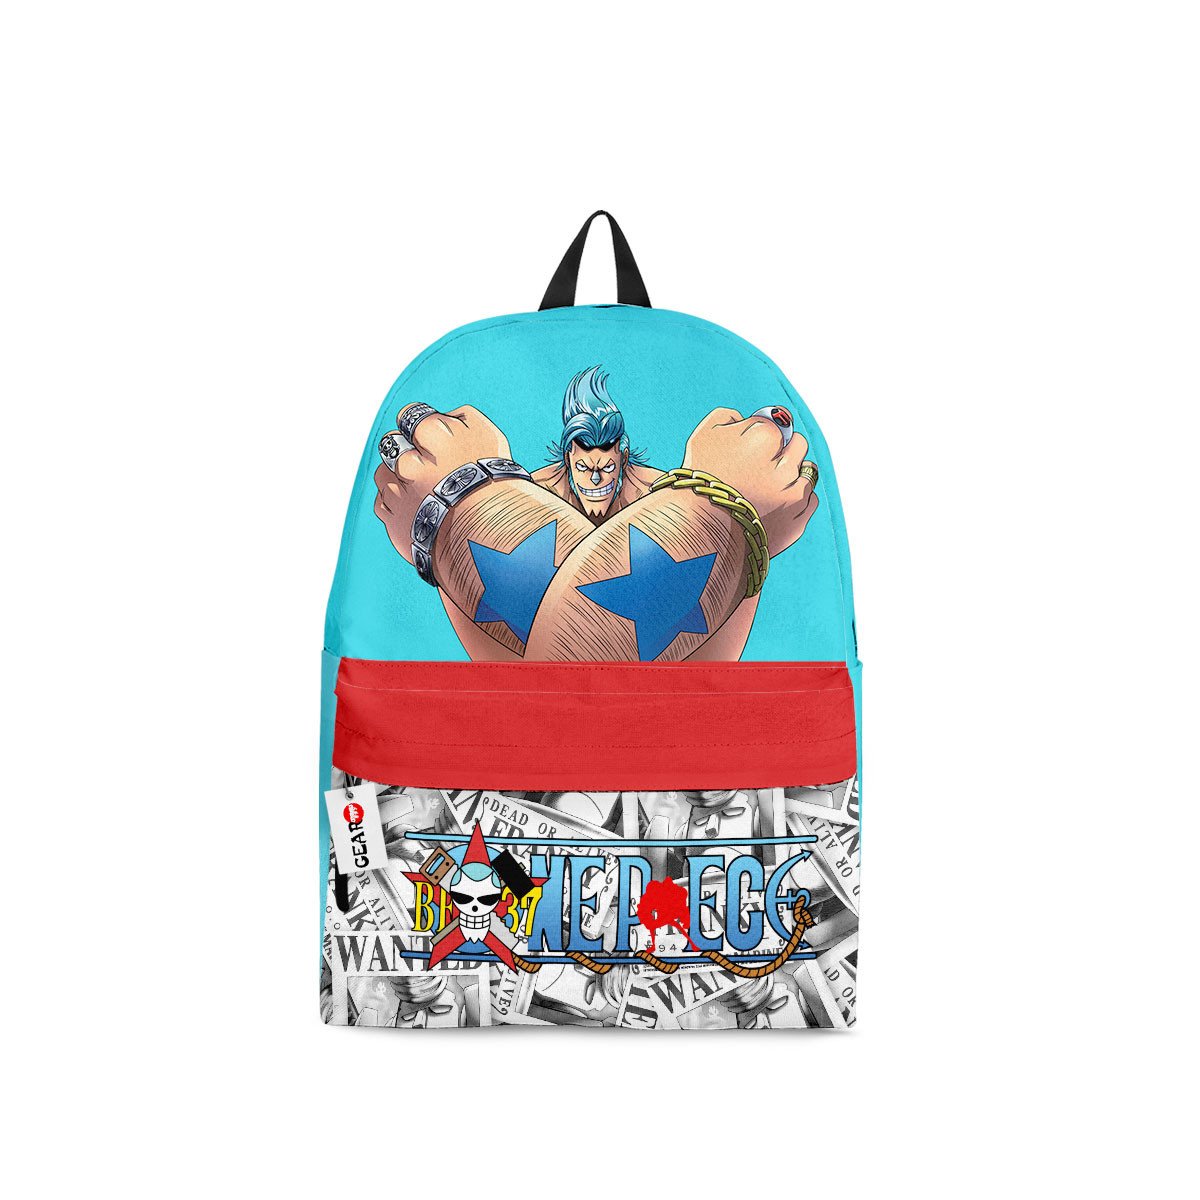 BEST Franky One Piece Anime Printed 3D Leisure Backpack